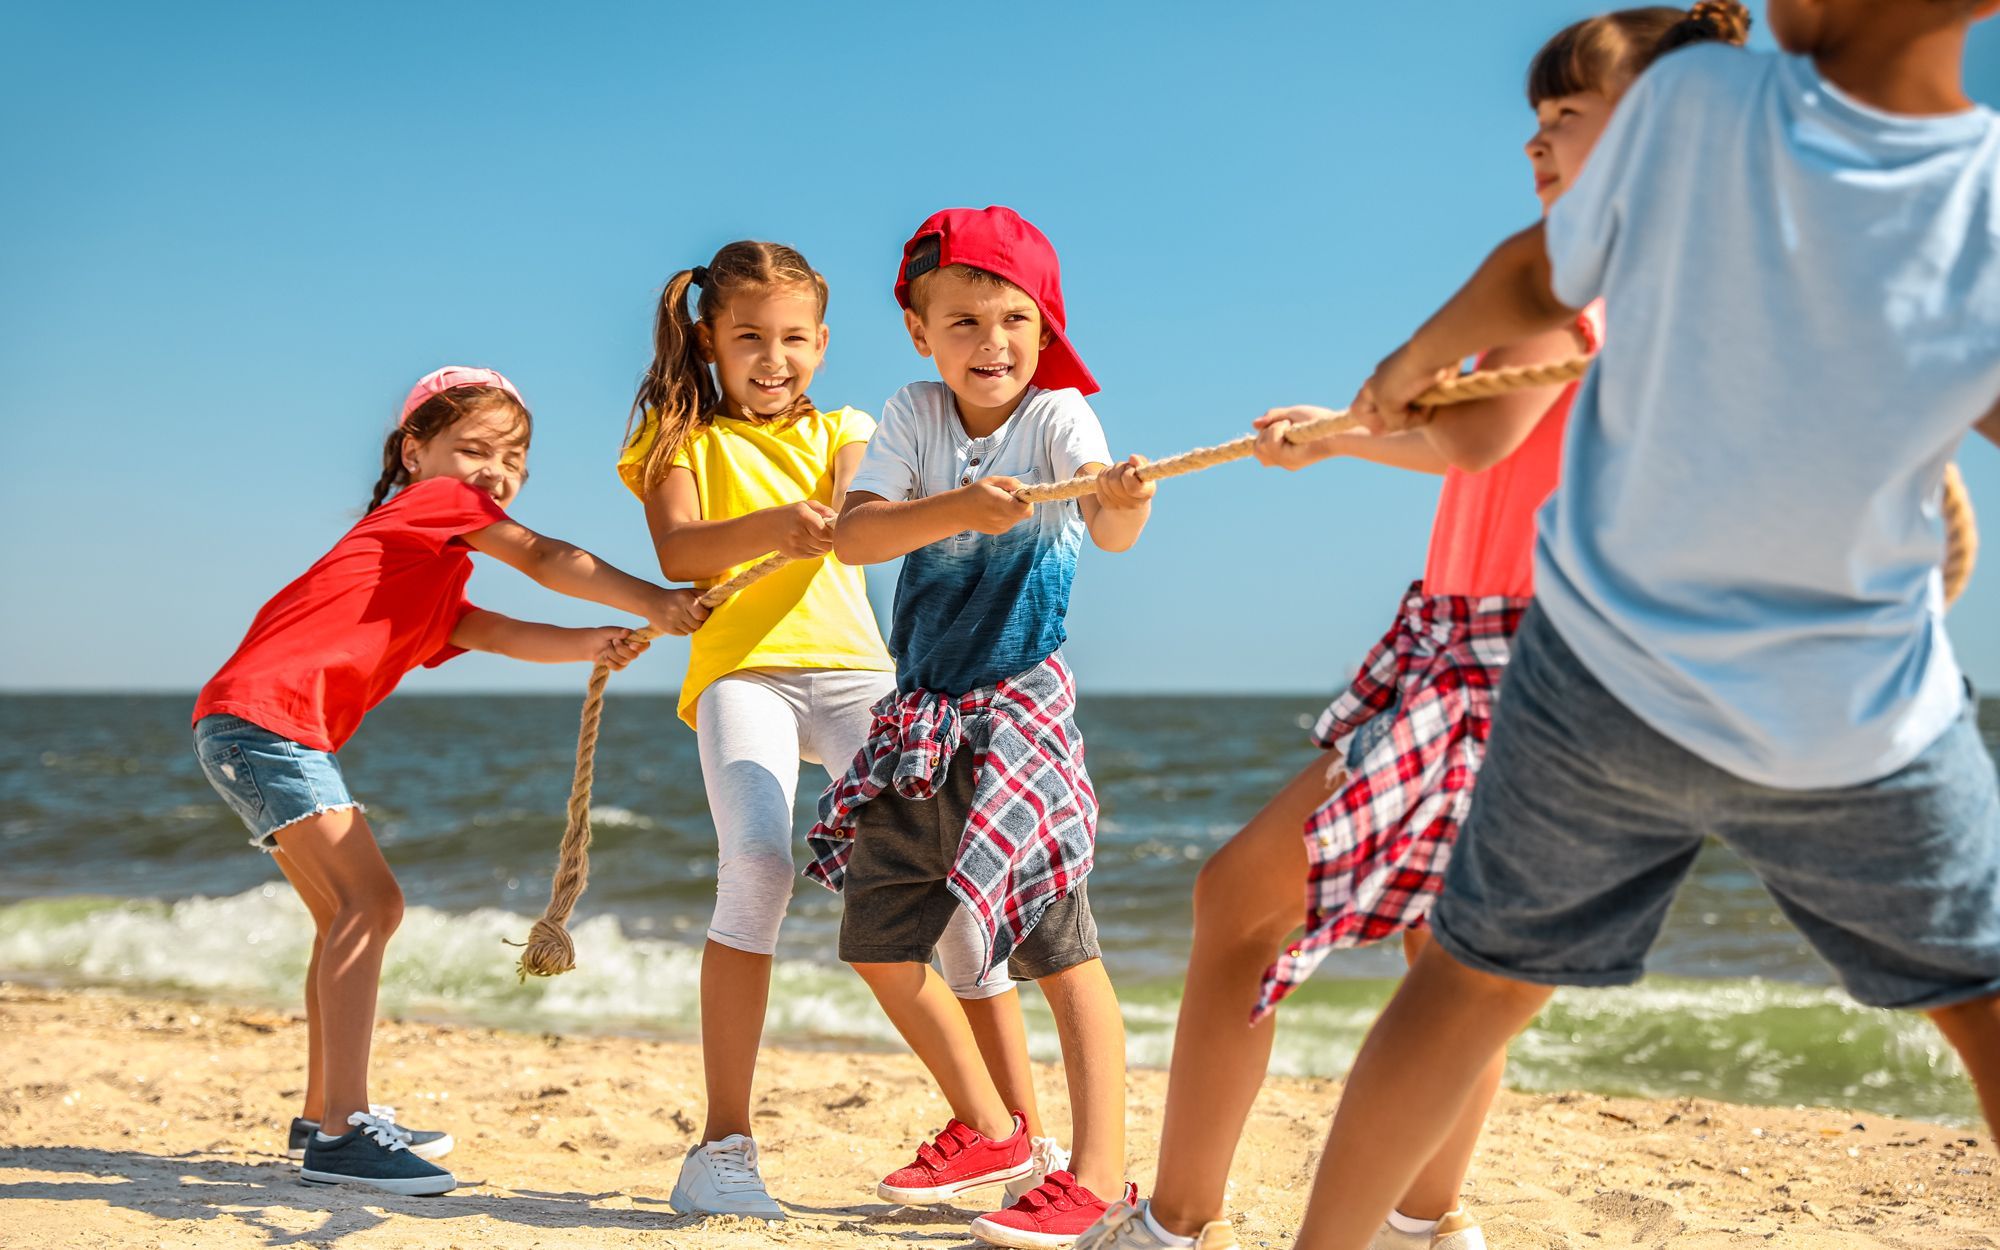 Skip The Dull Vacation Moments & Try These Fun Family Beach Games